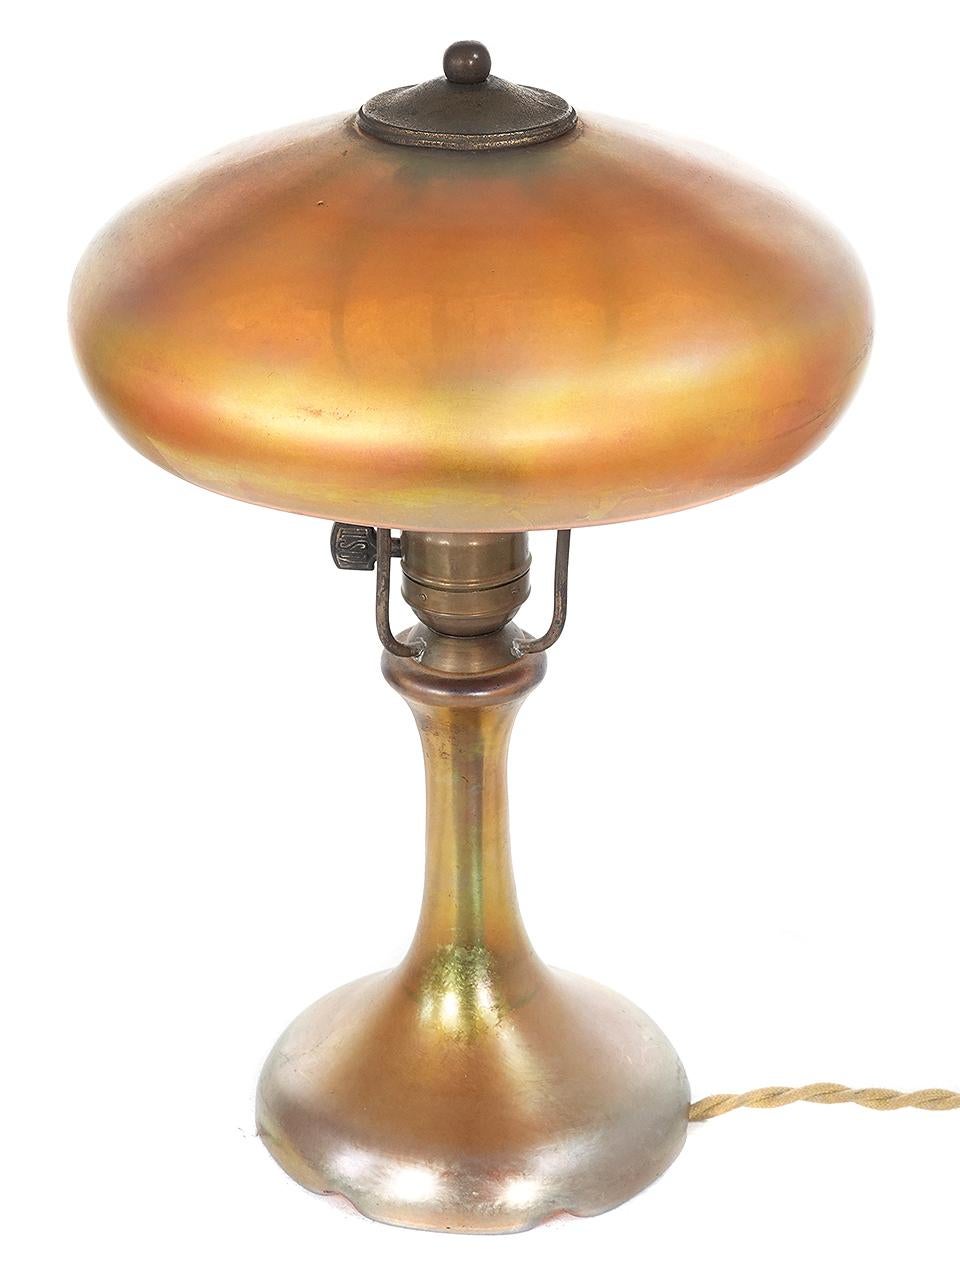 This Frederick Carder Steuben lamp is a gem and I have owned this example for over 40 years. It is all original with a new cord and plug. The patina is original as well.